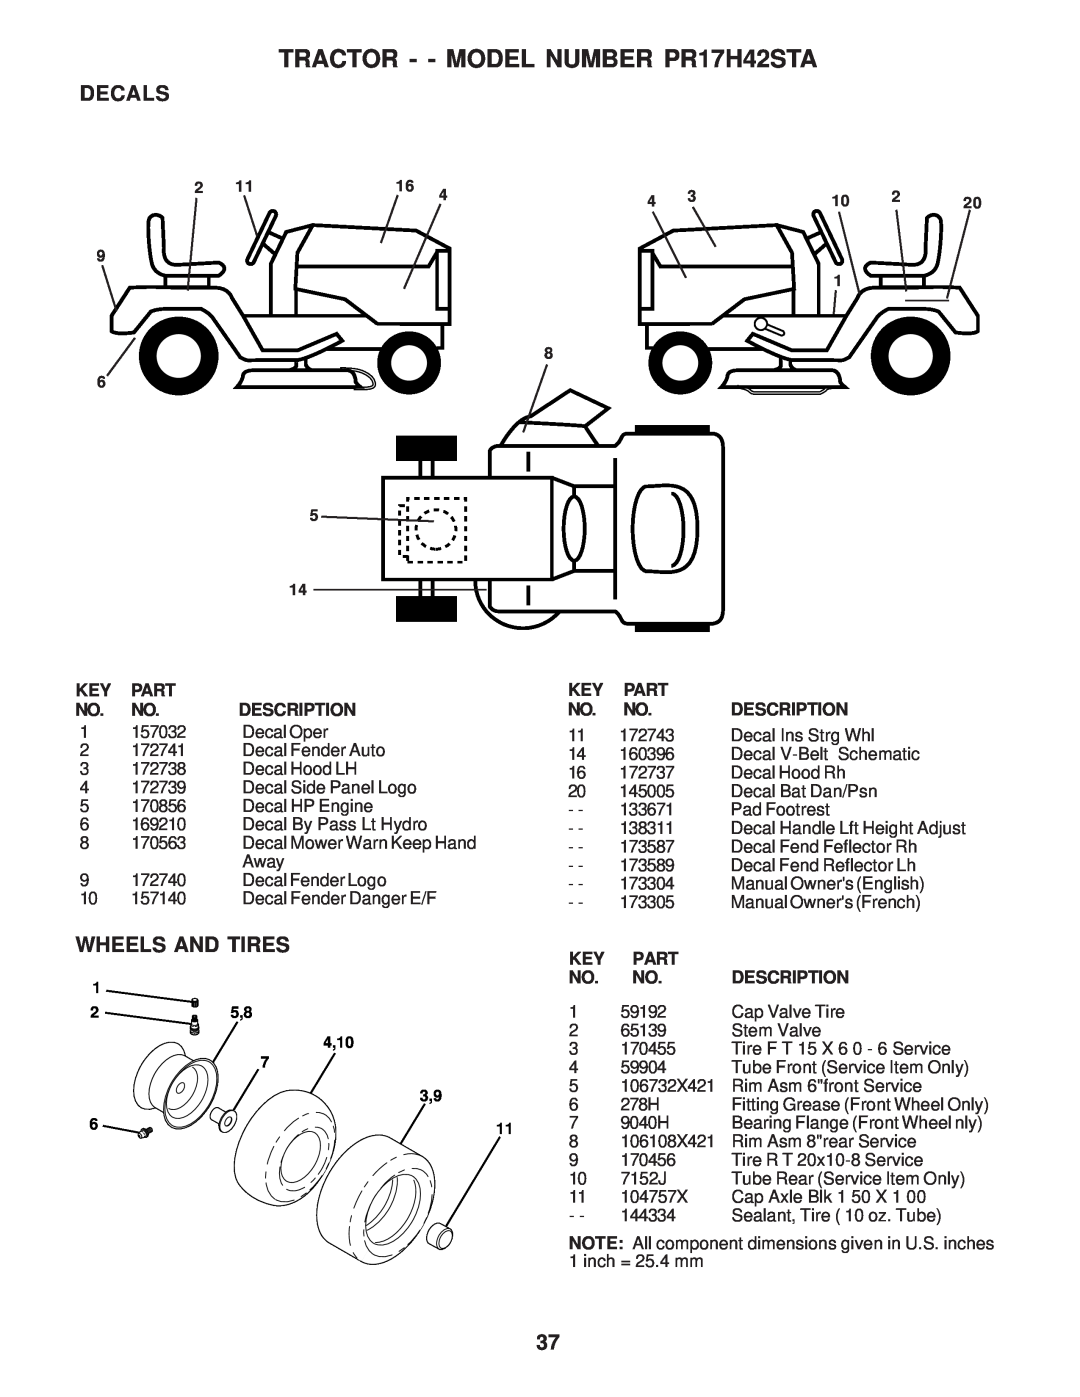 Poulan 173304 owner manual Decals, Wheels And Tires, TRACTOR - - MODEL NUMBER PR17H42STA 